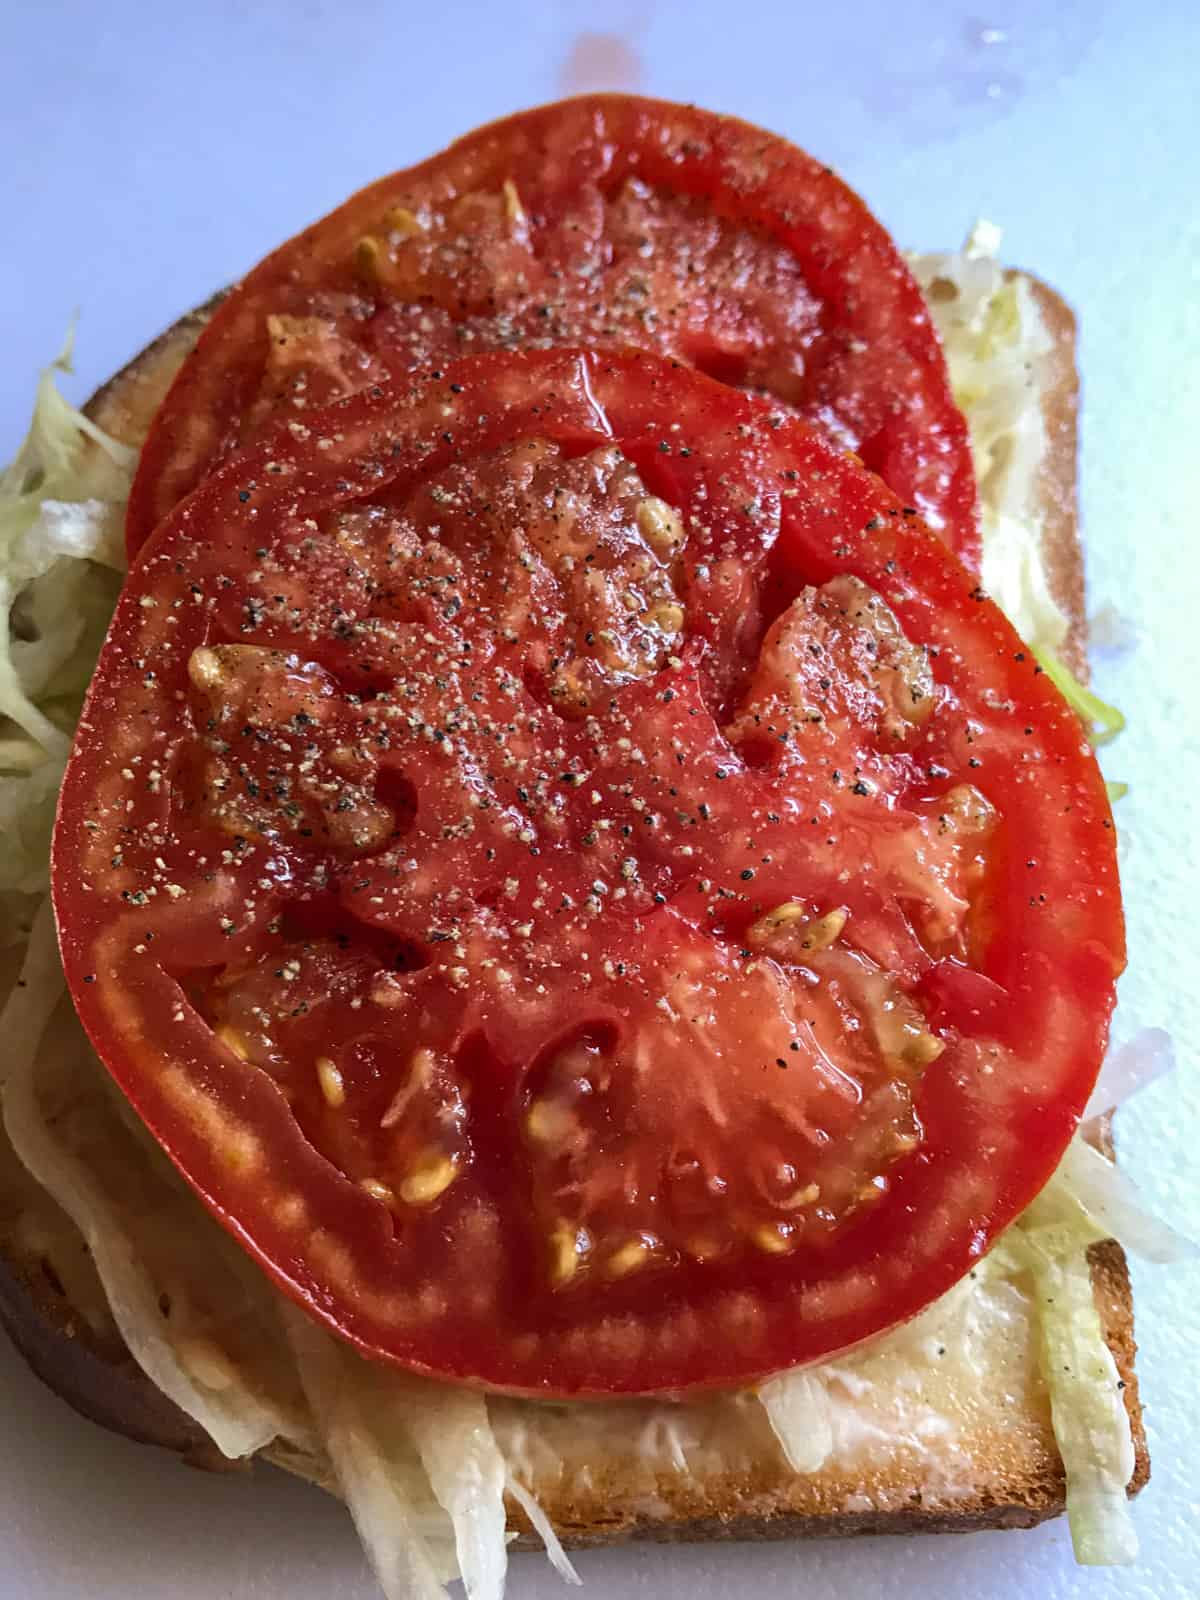 Red tomato with salt and pepper on bread.